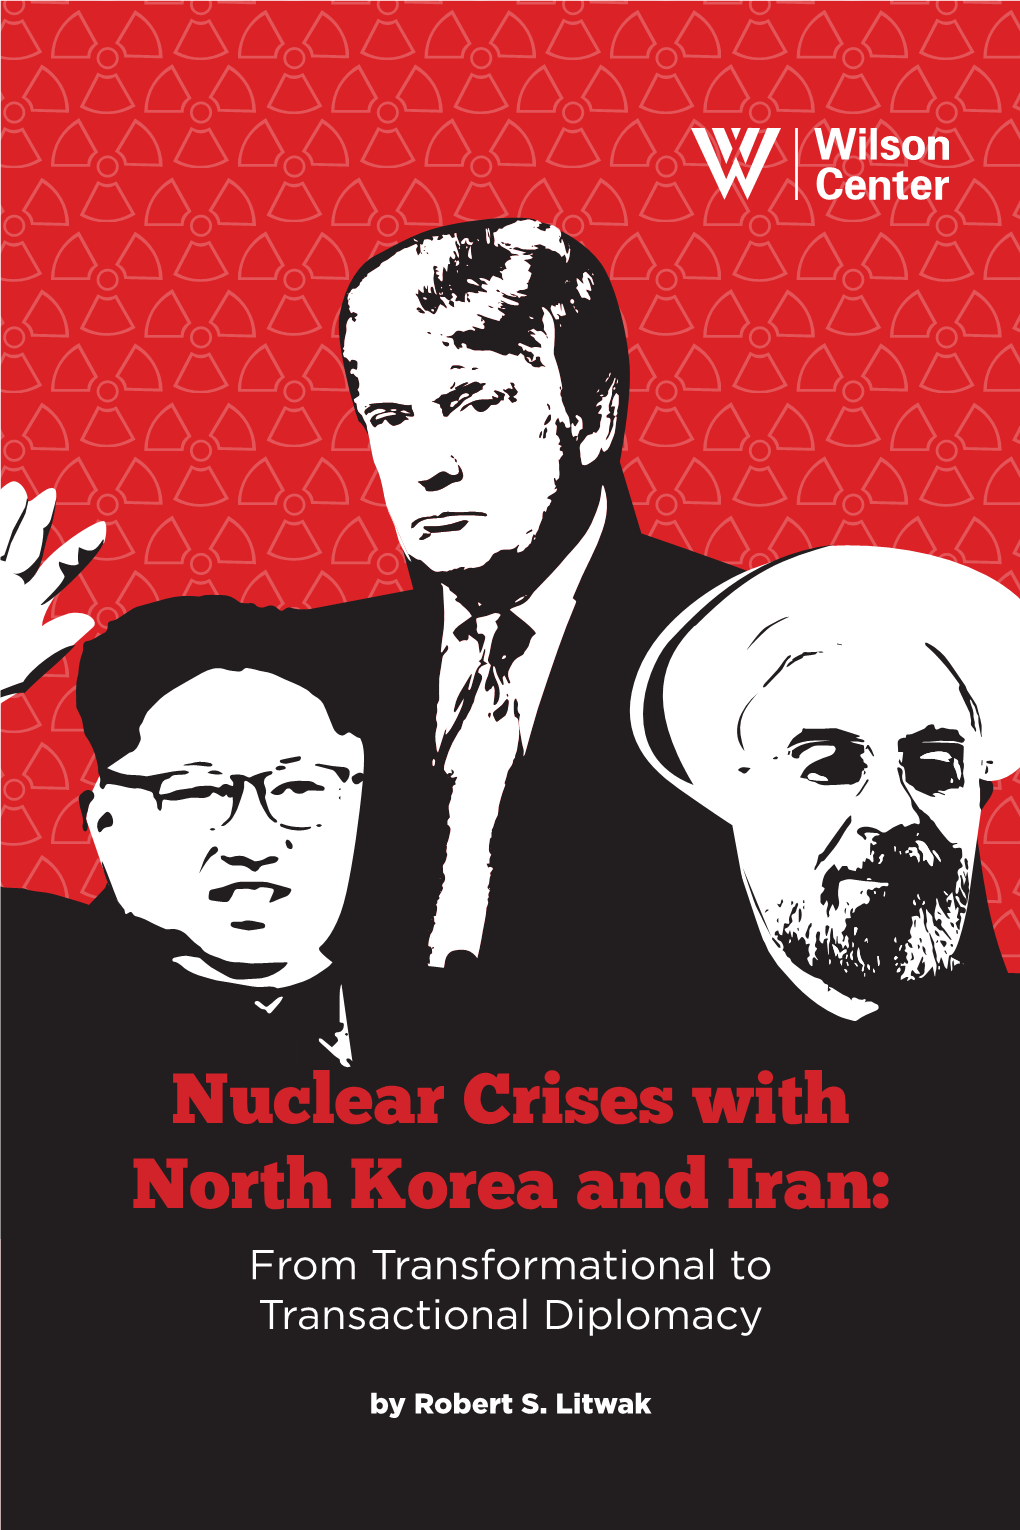 Nuclear Crises with North Korea and Iran: from Transformational to Transactional Diplomacy